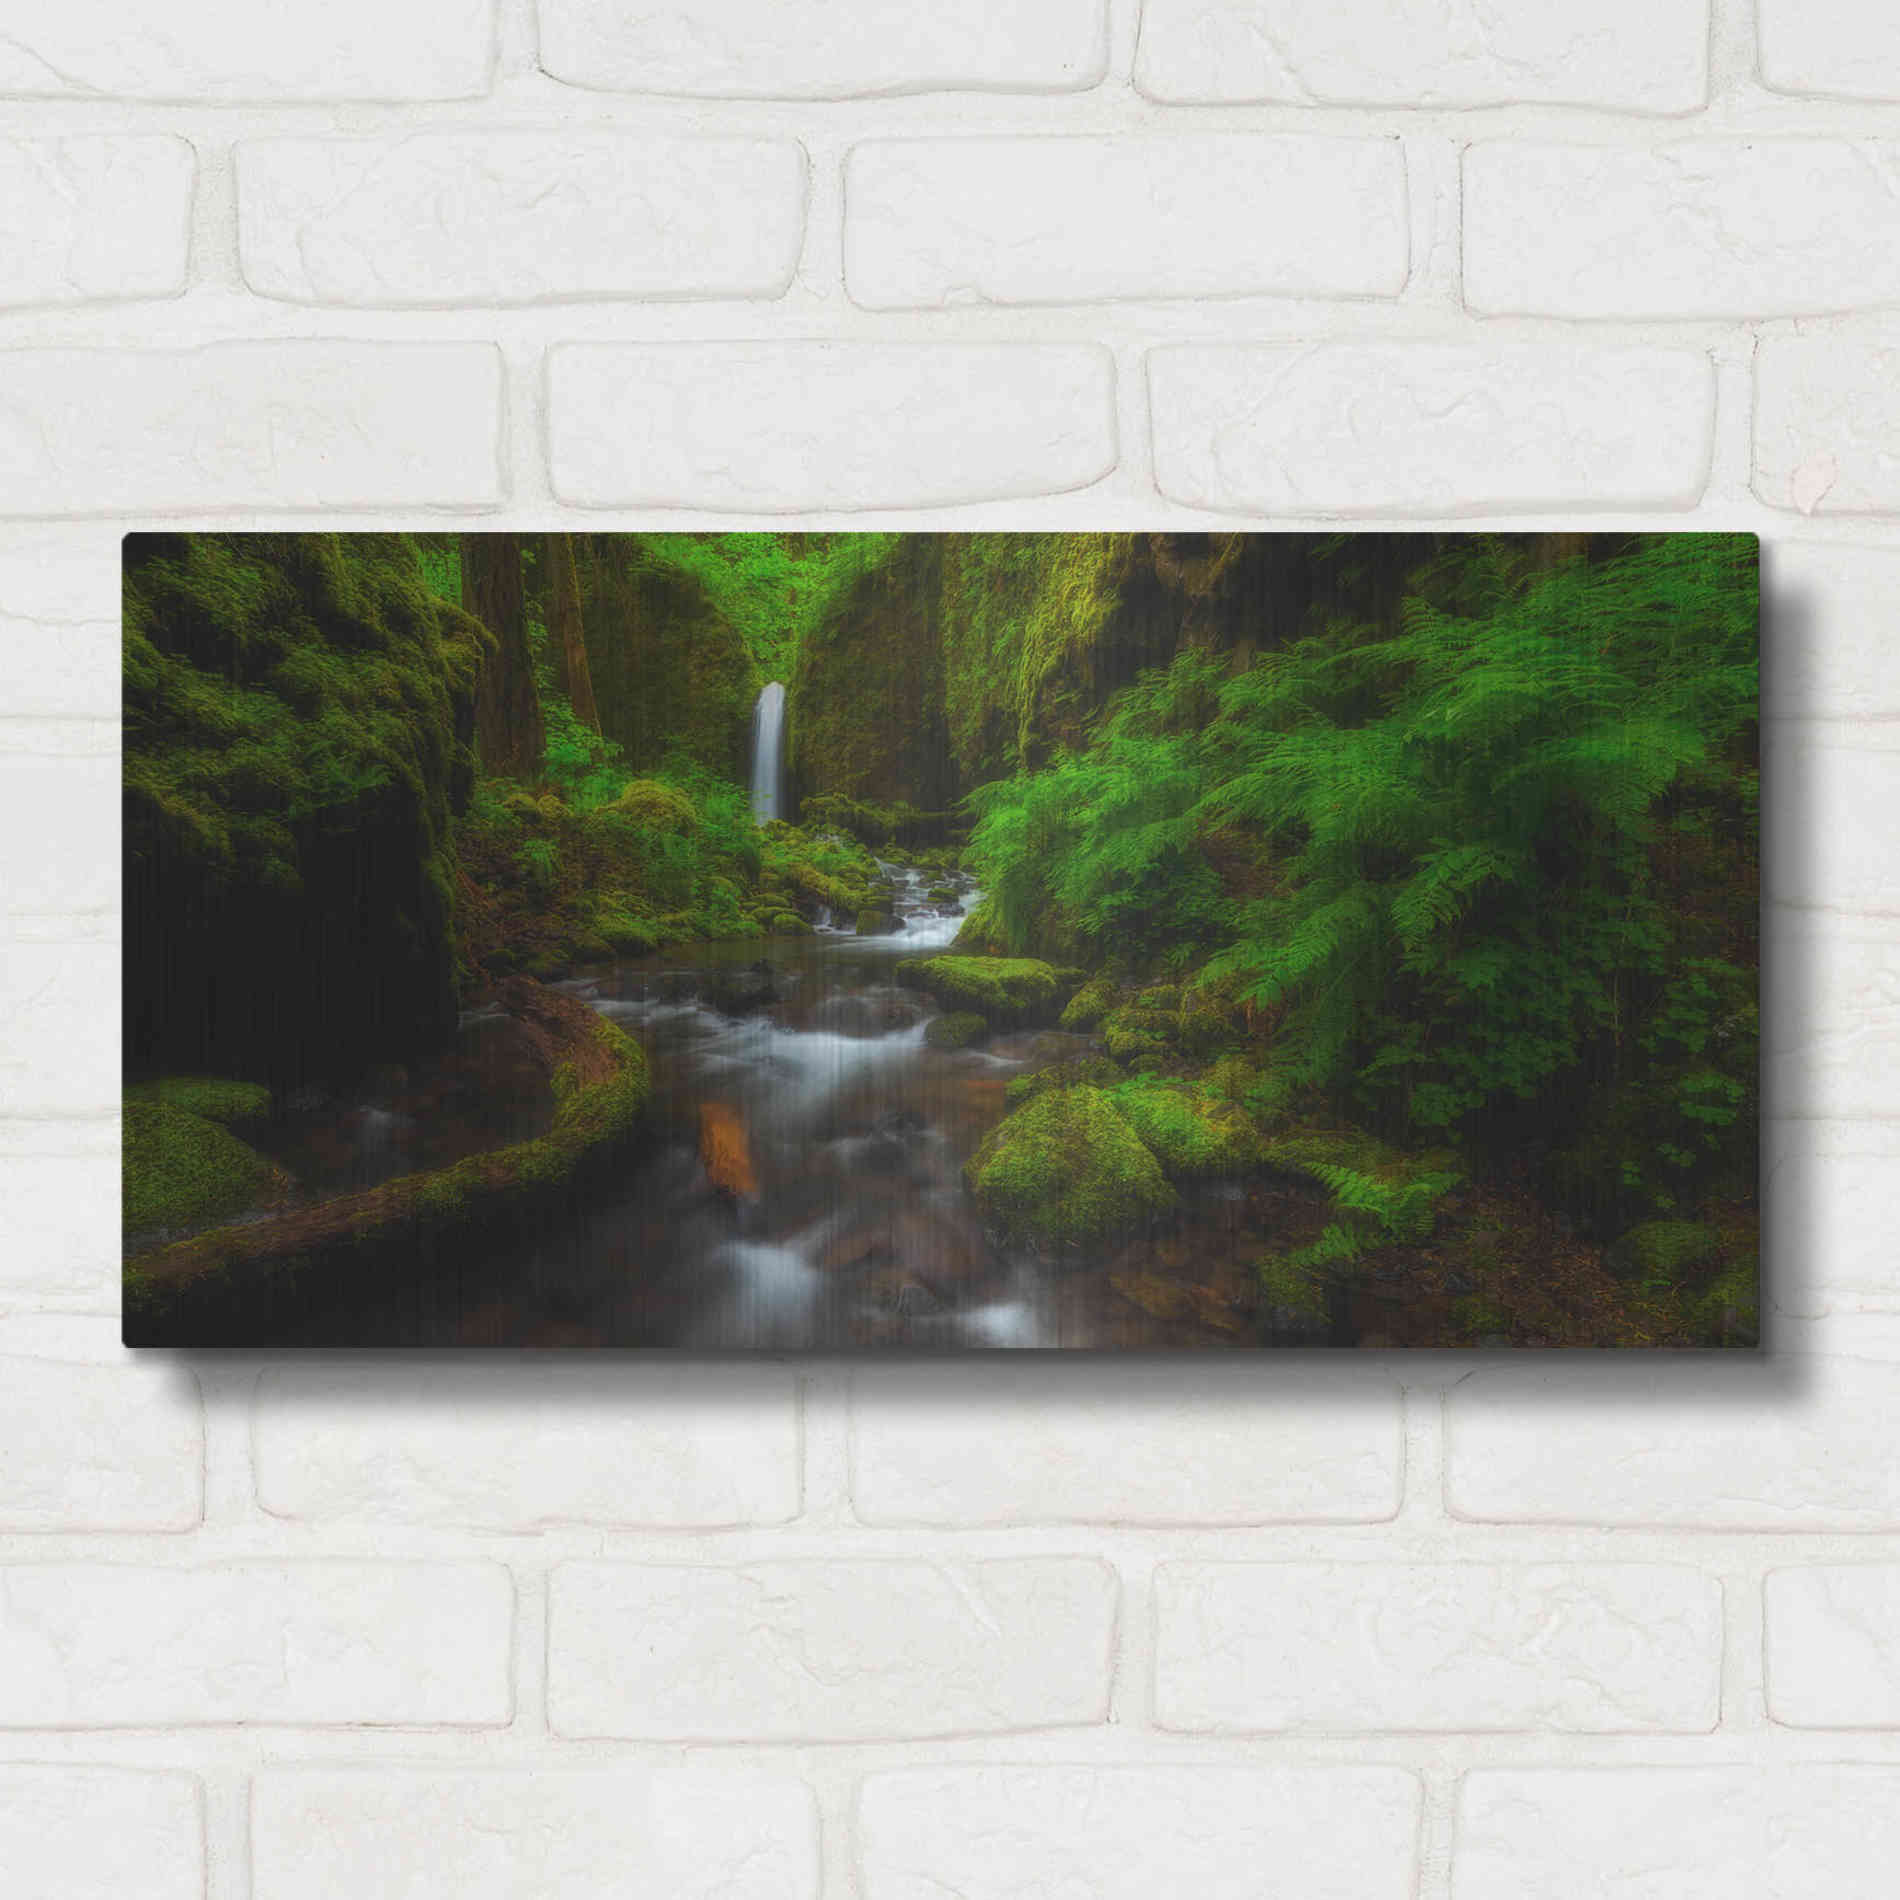 Luxe Metal Art 'Early Morning At The Grotto' by Darren White, Metal Wall Art,24x12